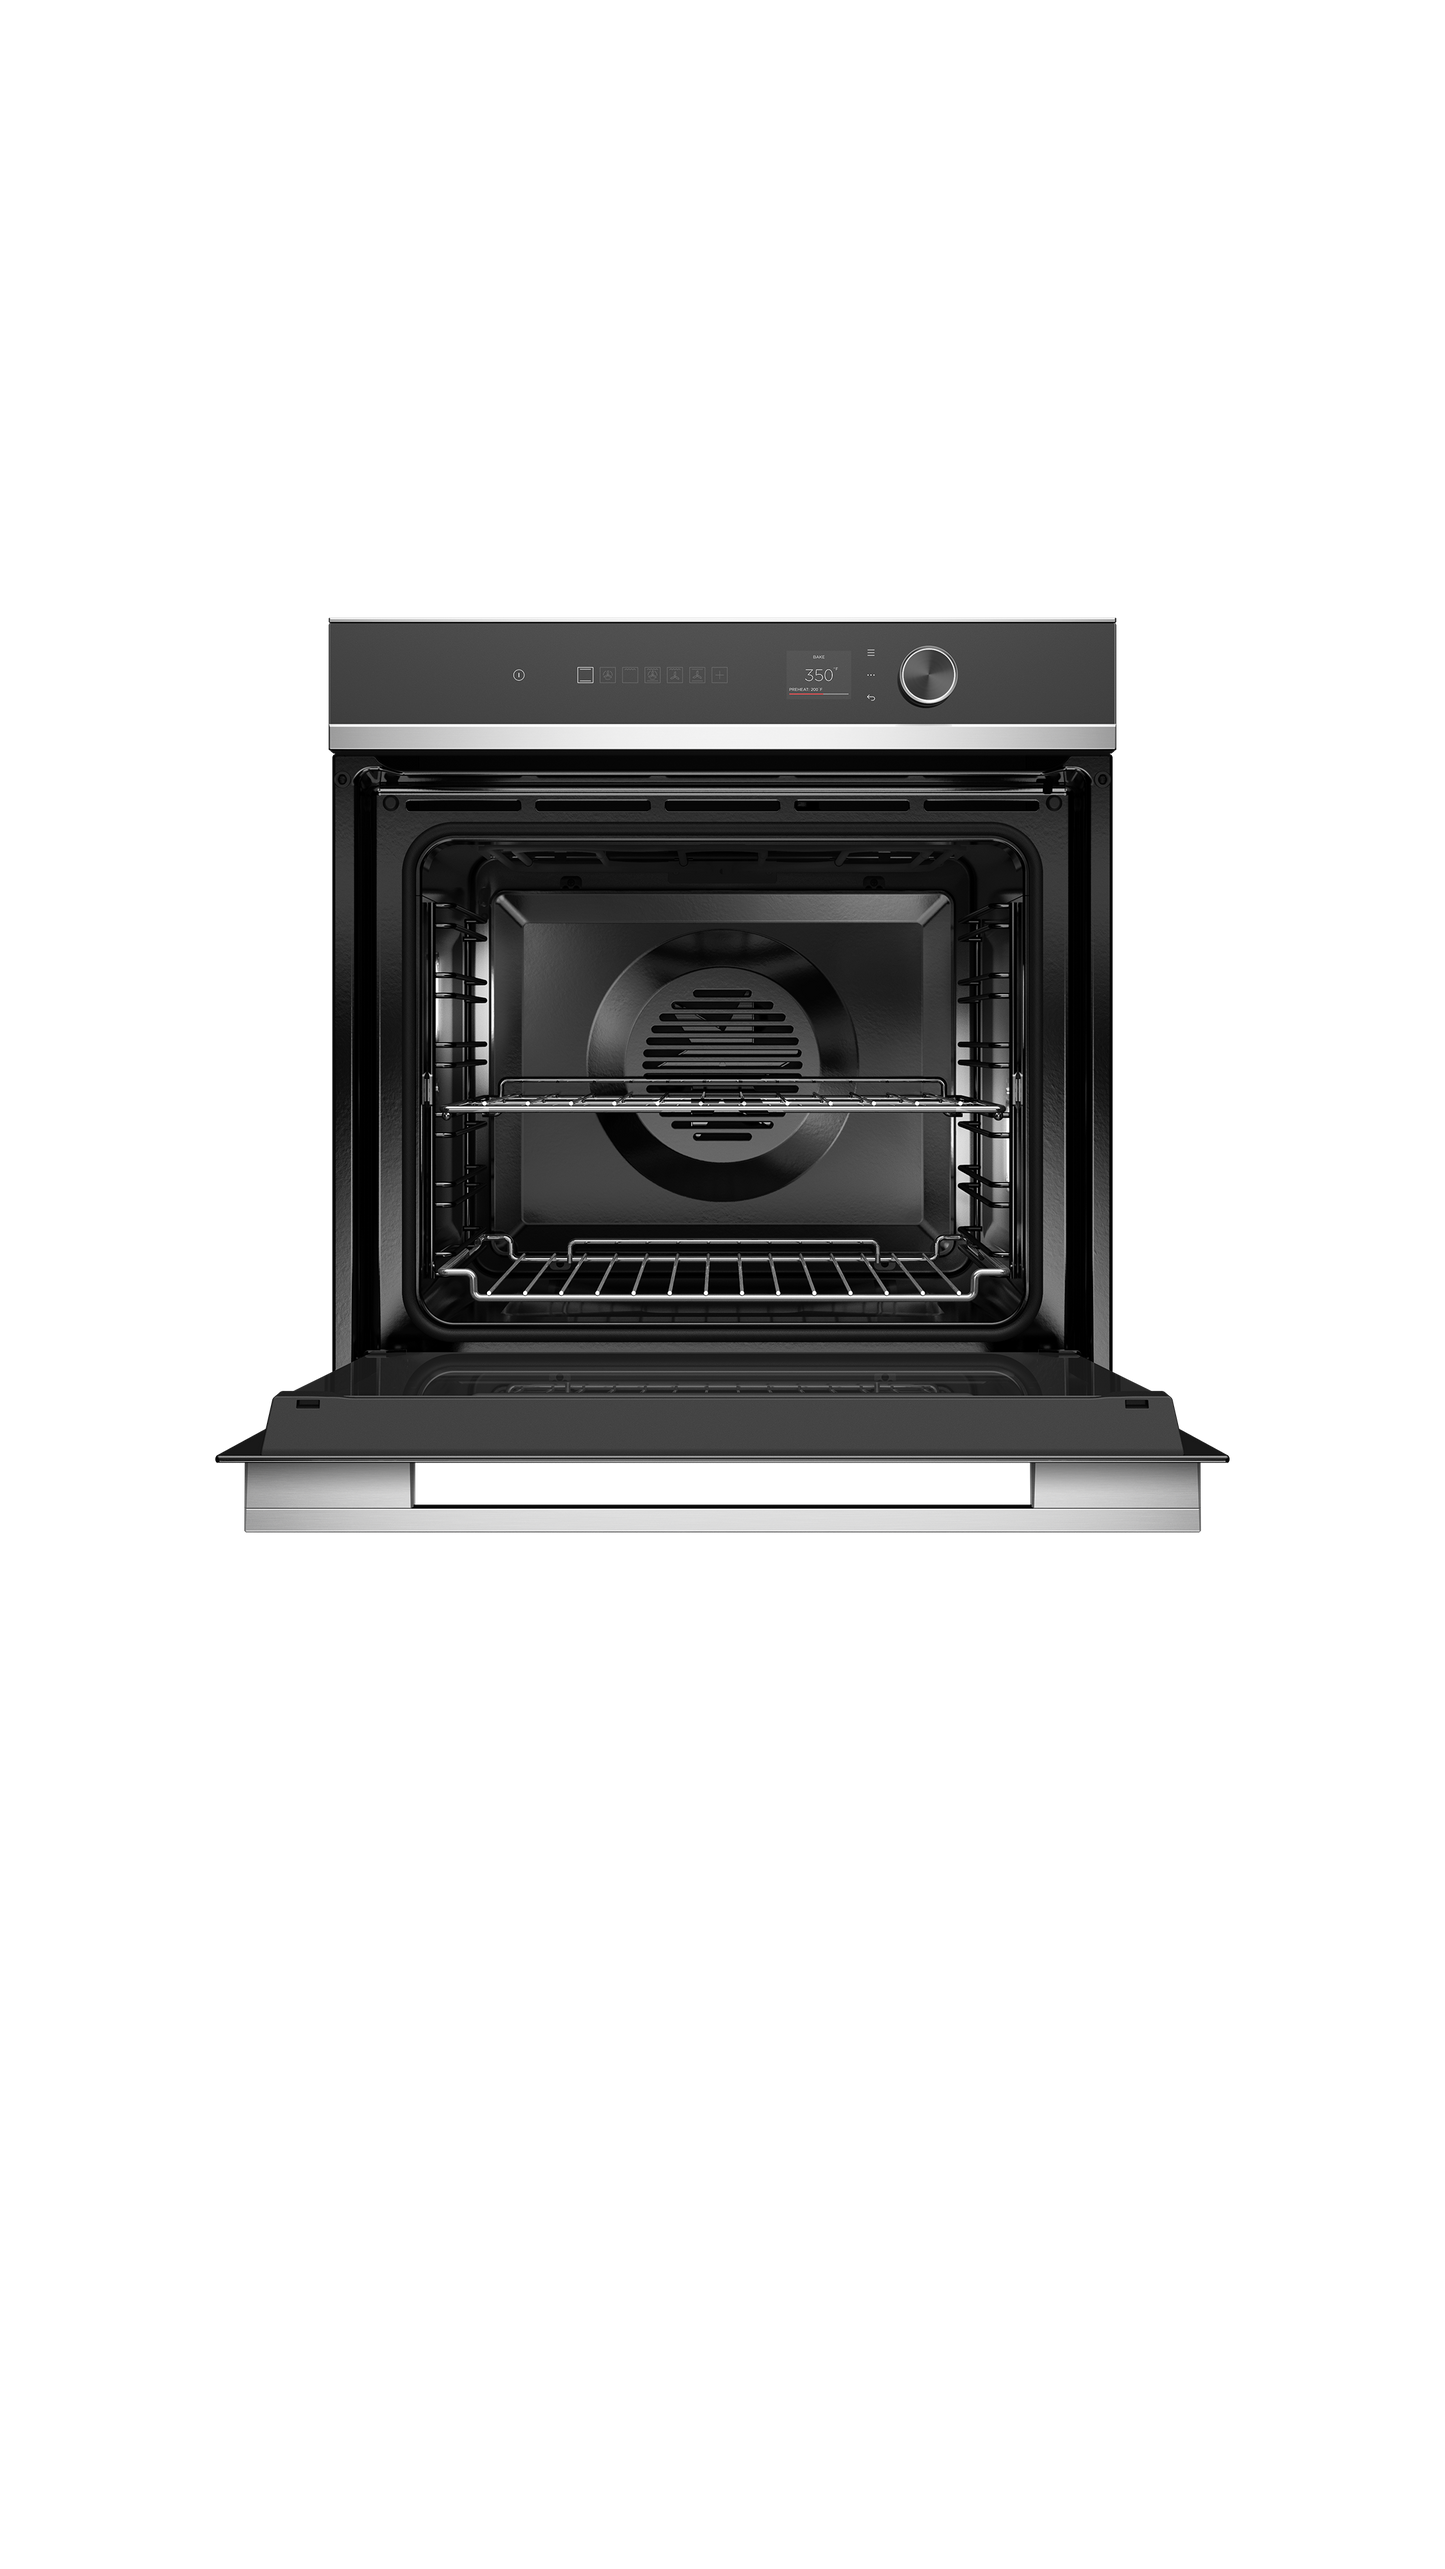 Oven, 24", 11 Function, Self-cleaning, 84-mug-closed